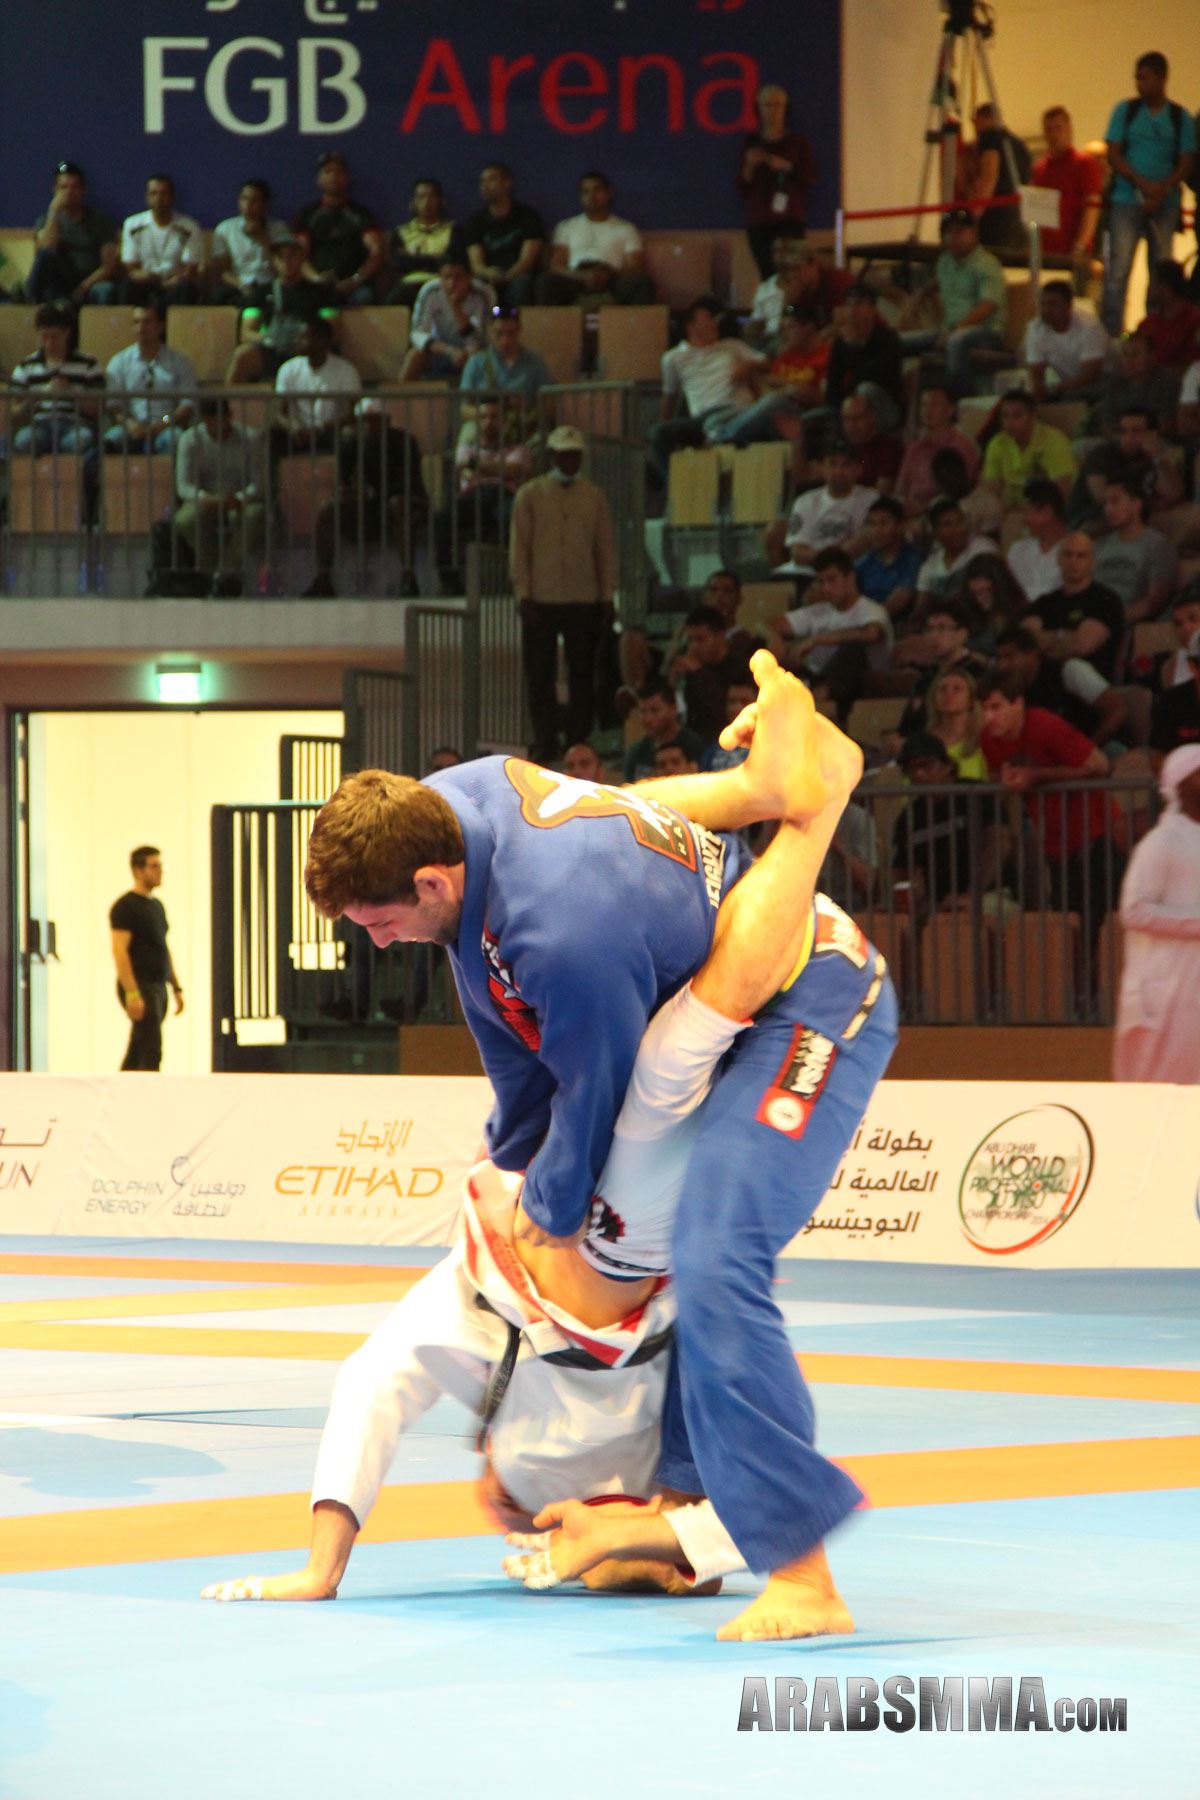 Abu Dhabi World Pro 2014 Absolute Division